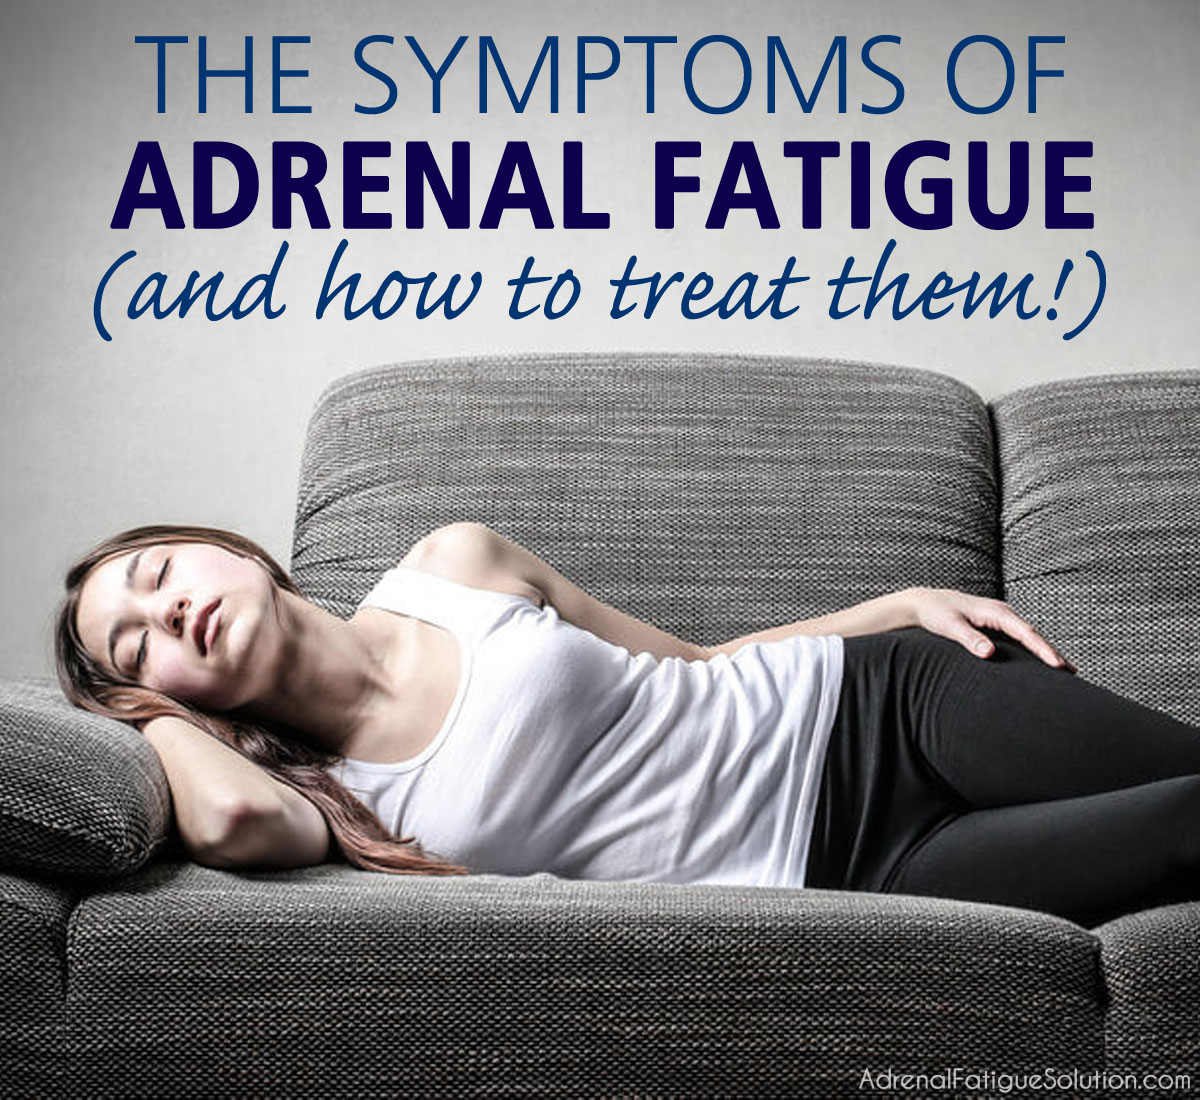 7 Common Adrenal Fatigue Symptoms And How To Treat Them